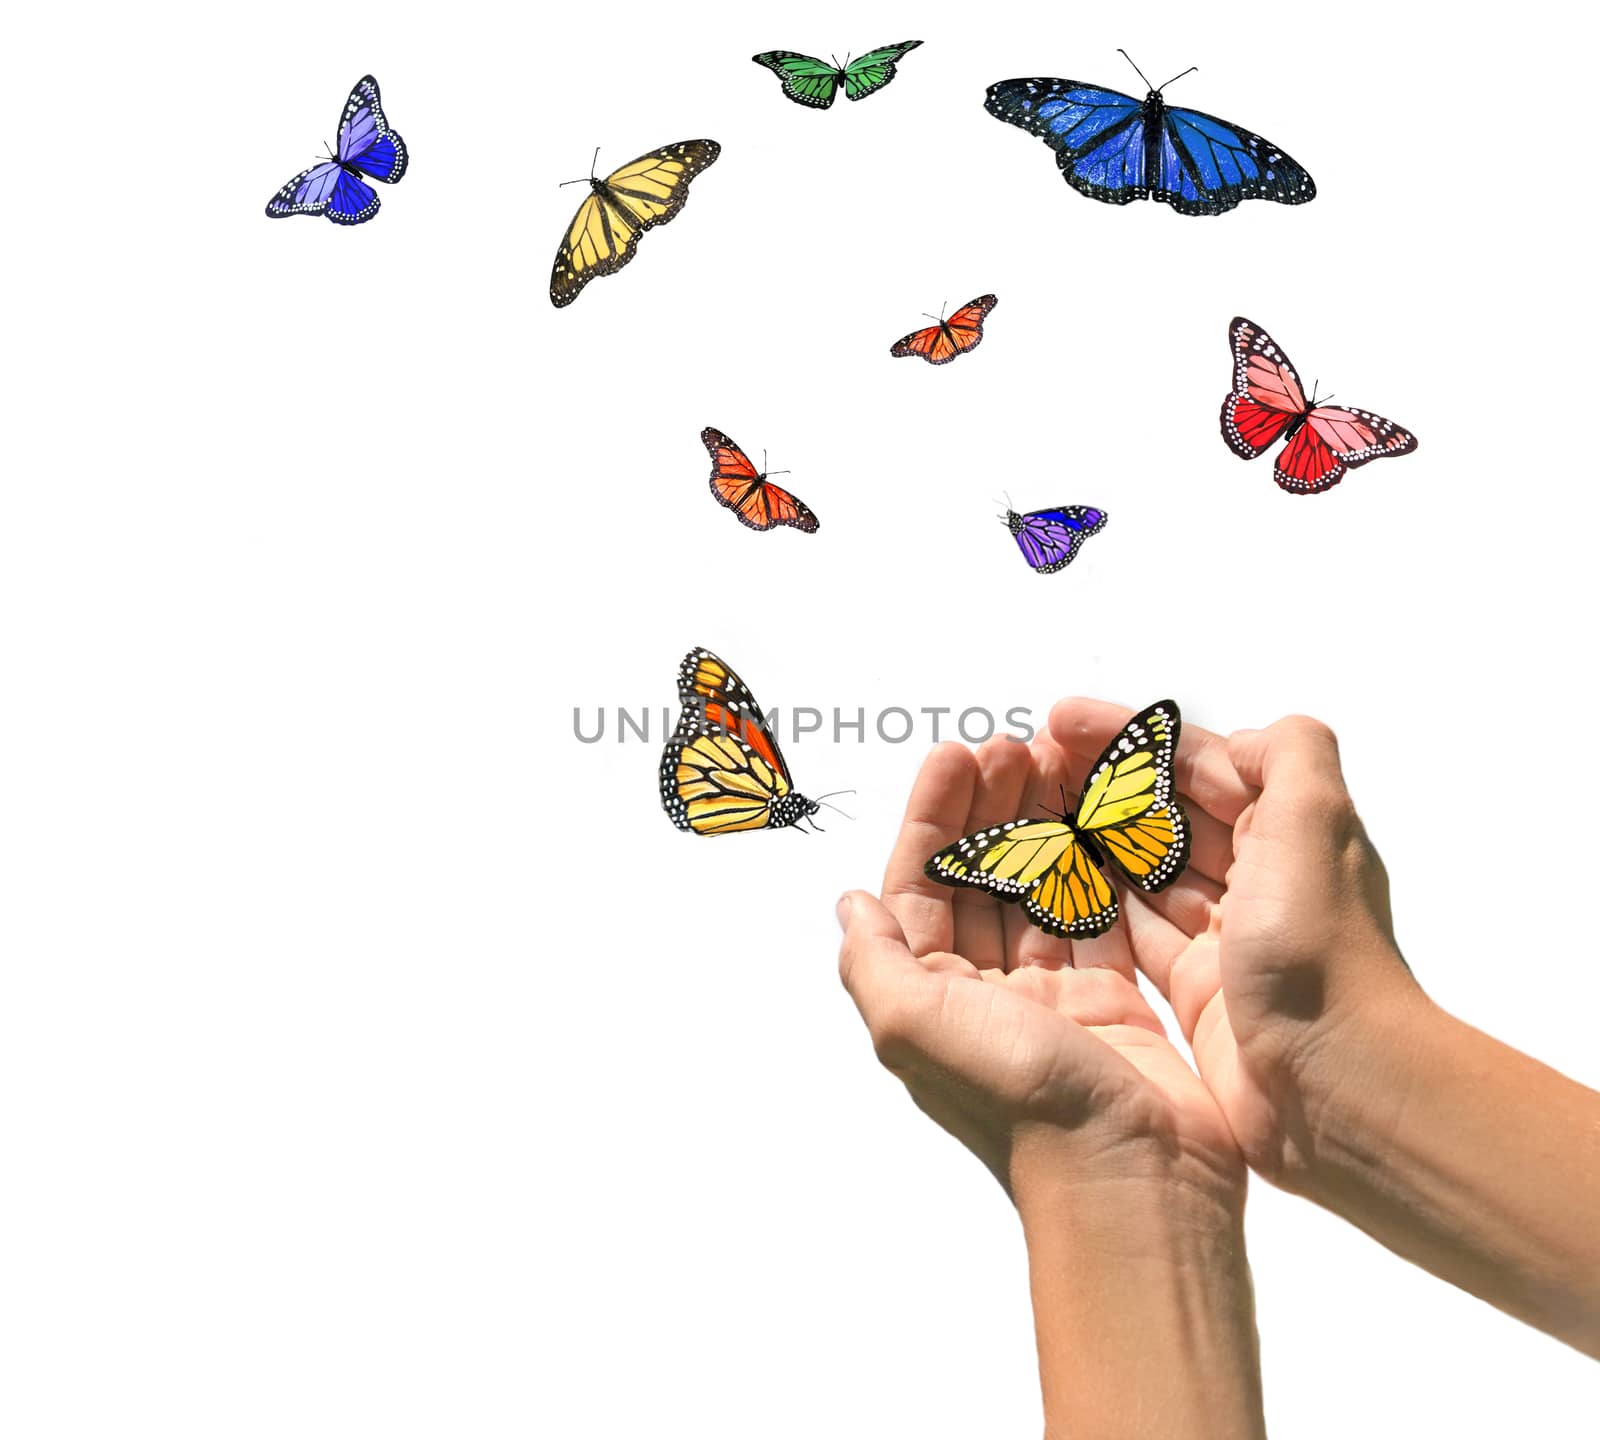 Hands Releasing Butterflies into Blank White Space by tobkatrina